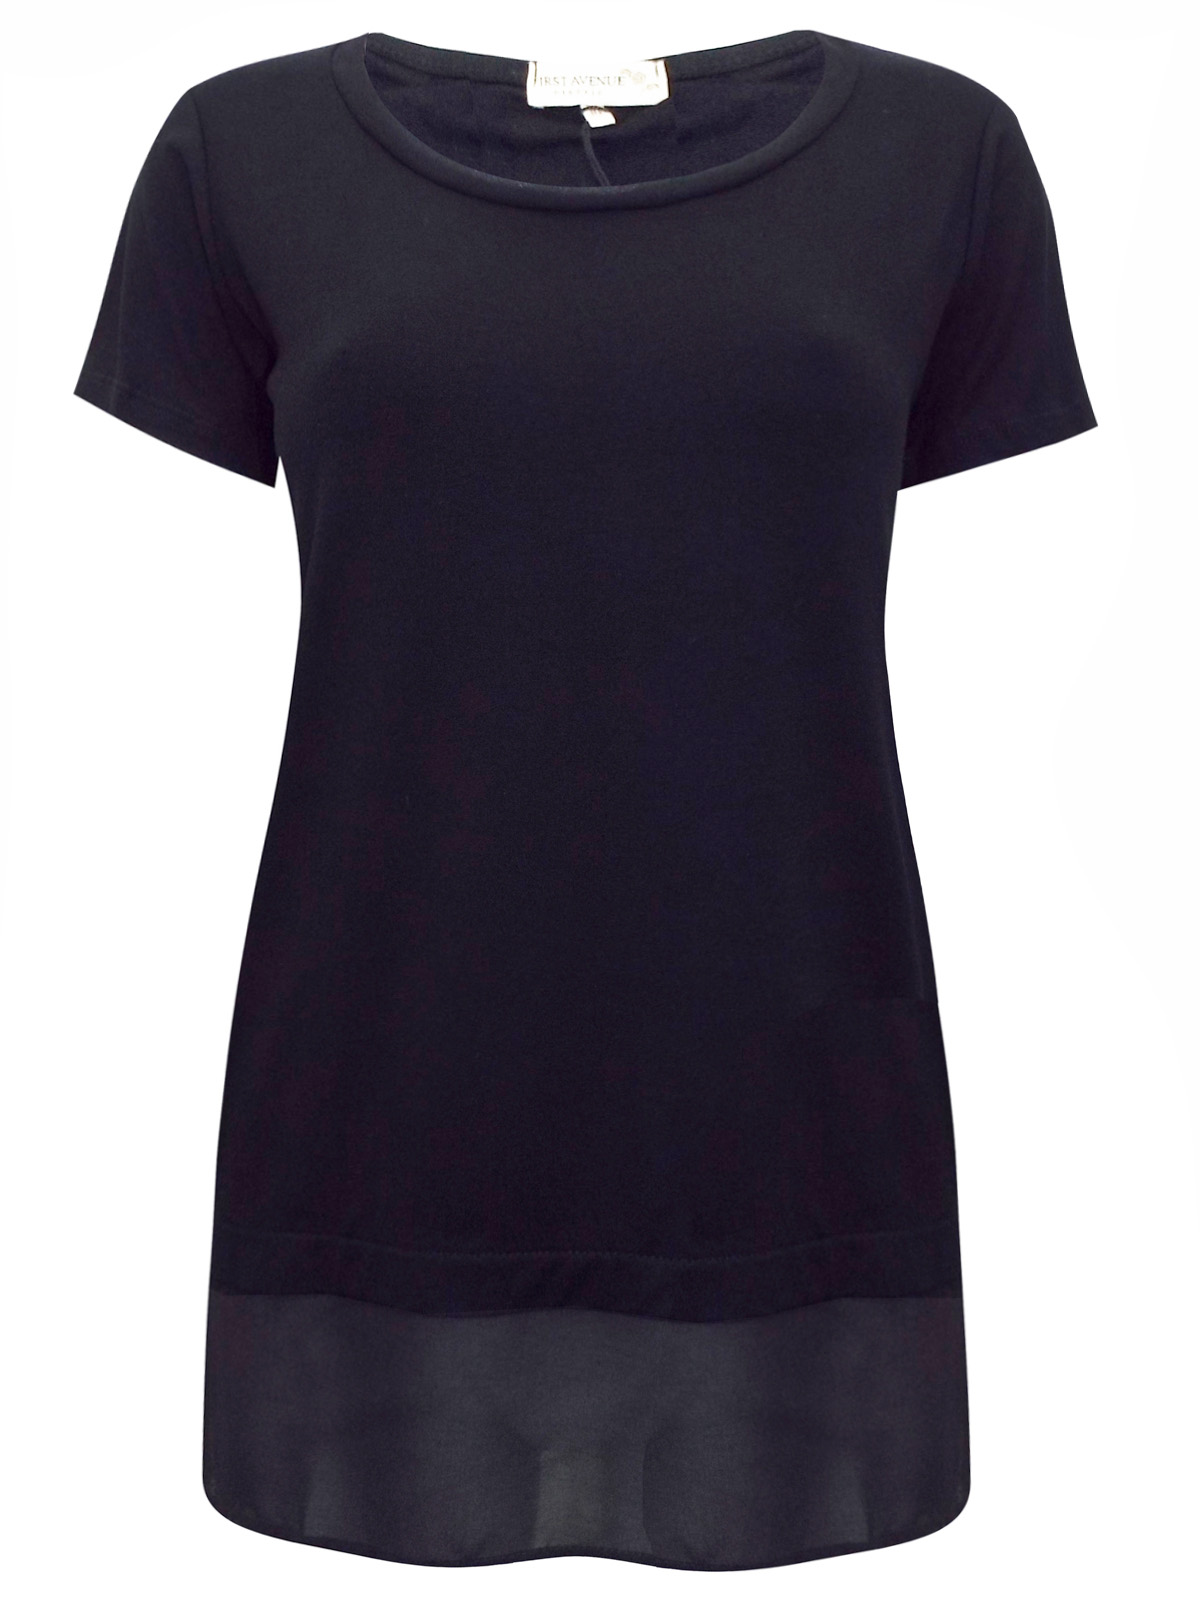 First Avenue BLACK Short Sleeve Mesh Panel Top - Size 10 to 20